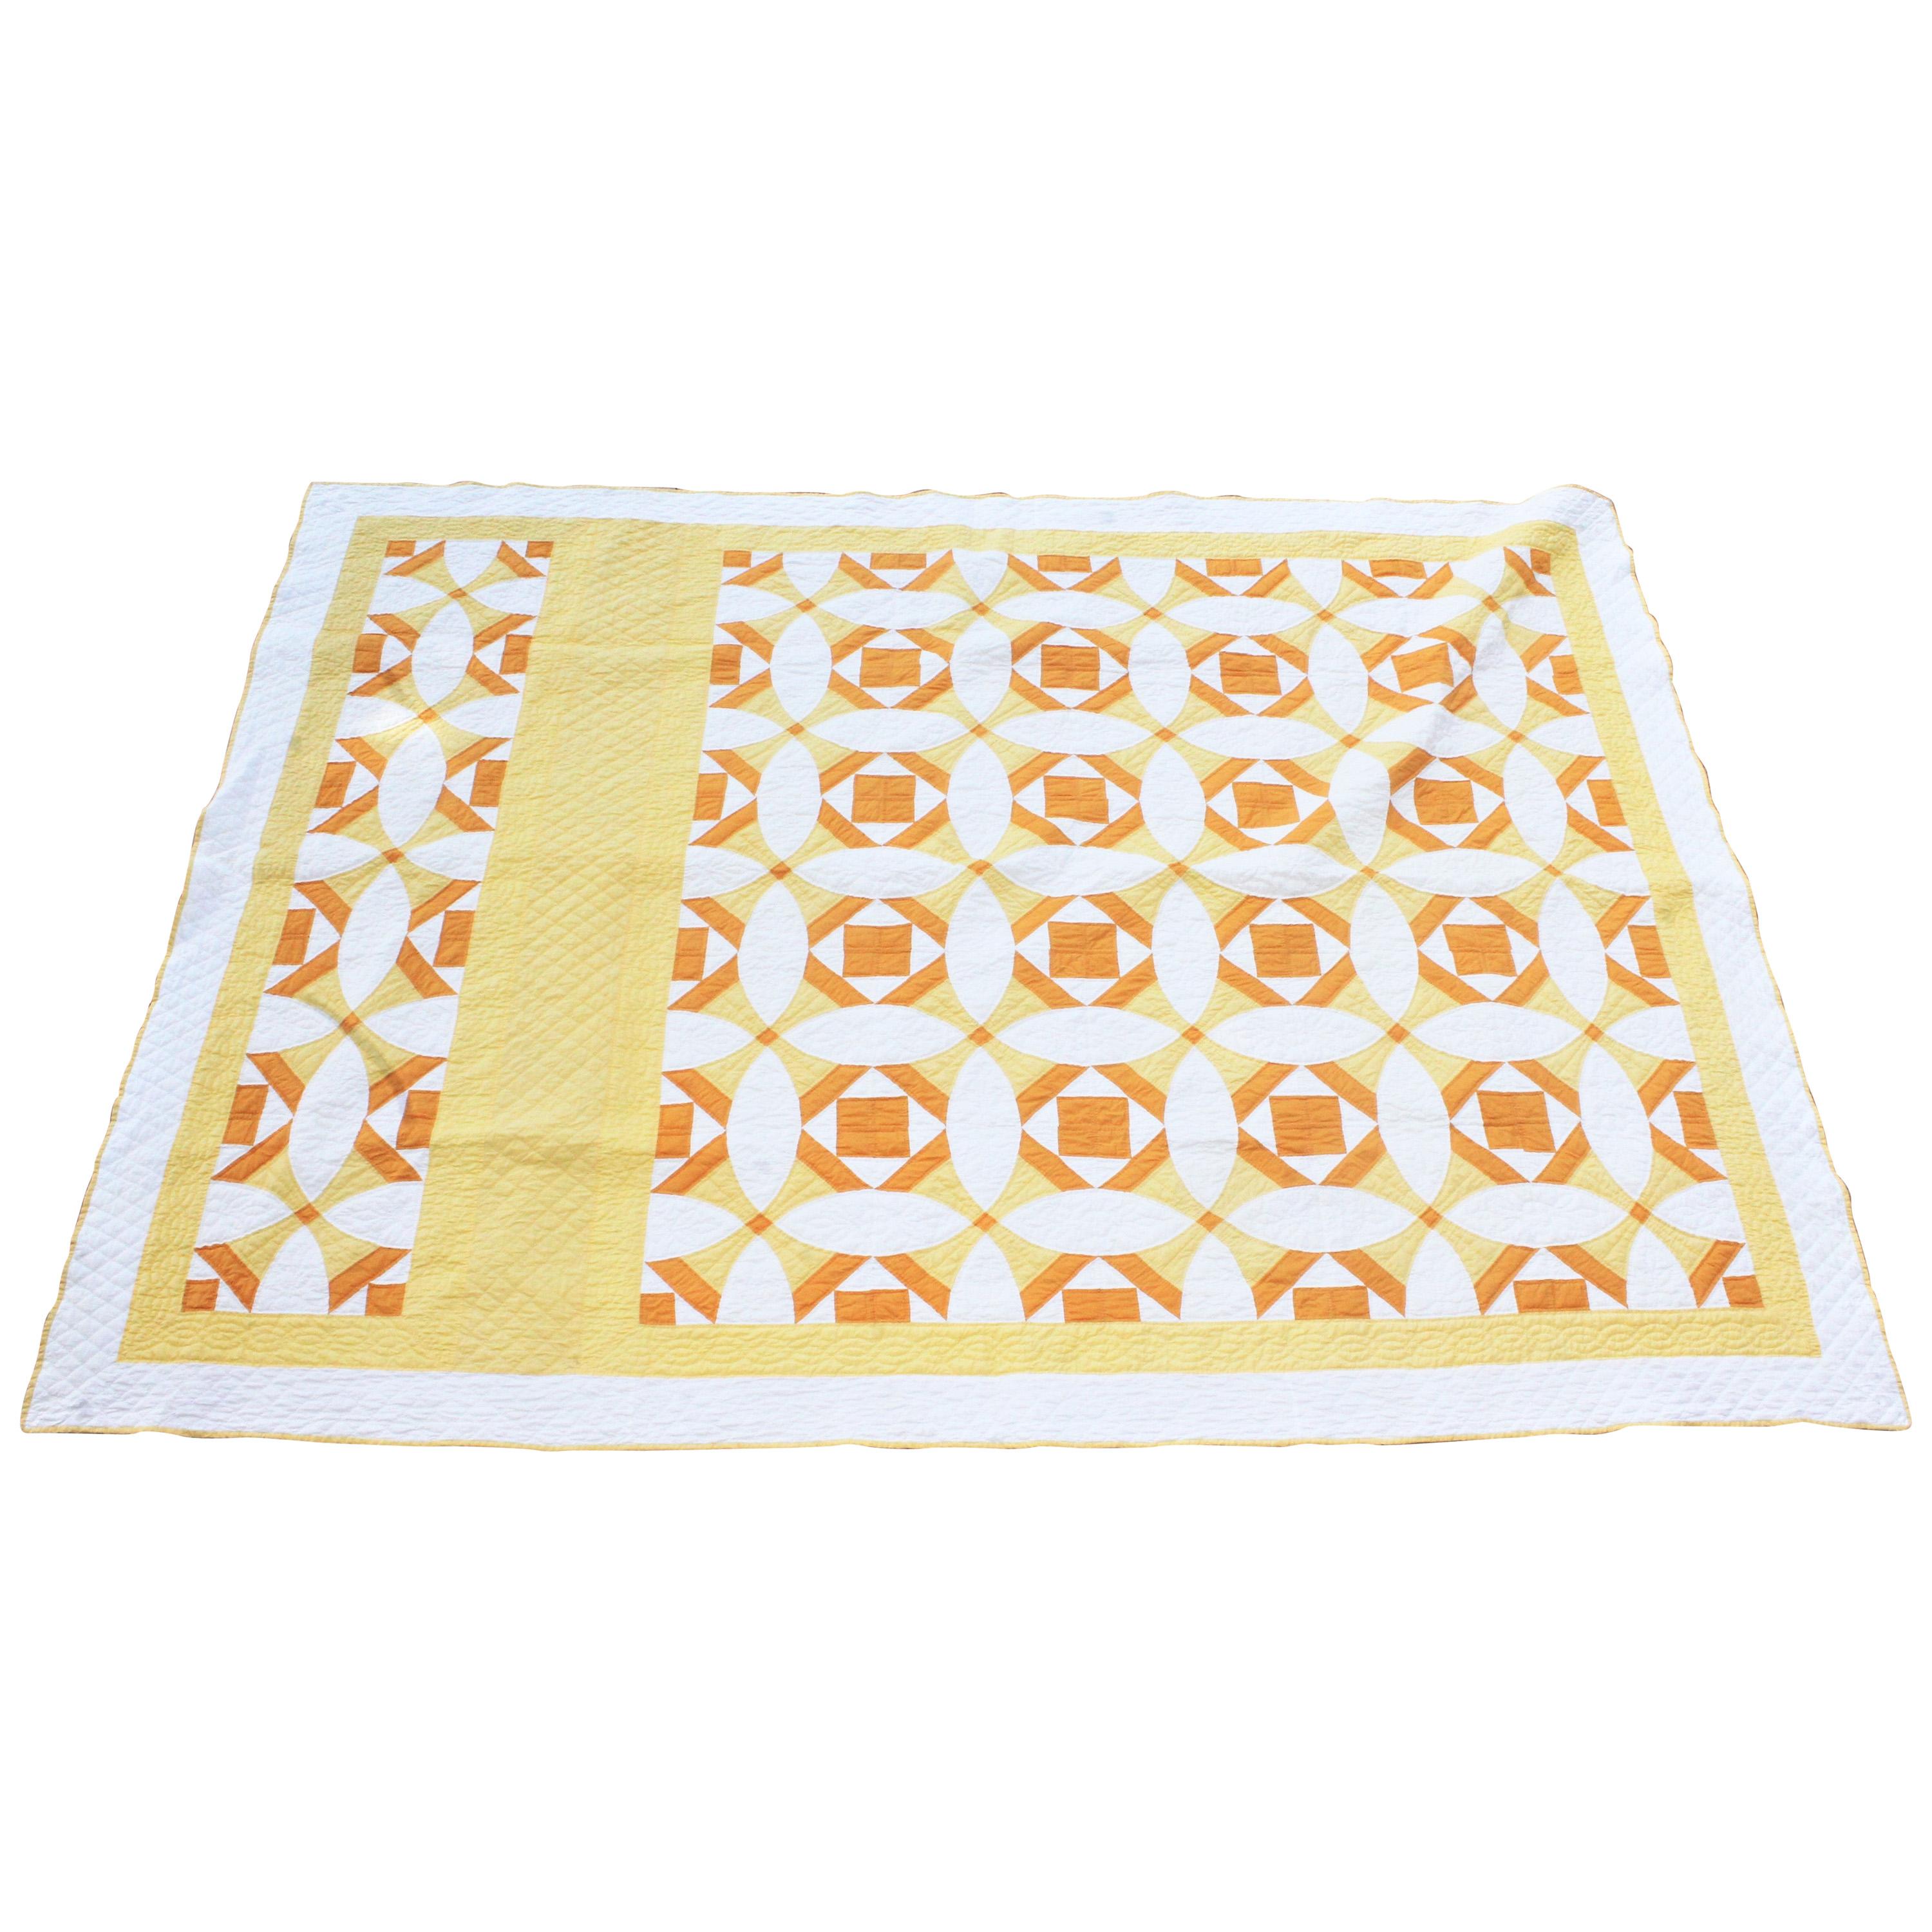 Antique Quilt Yellow and White Geometric Pattern